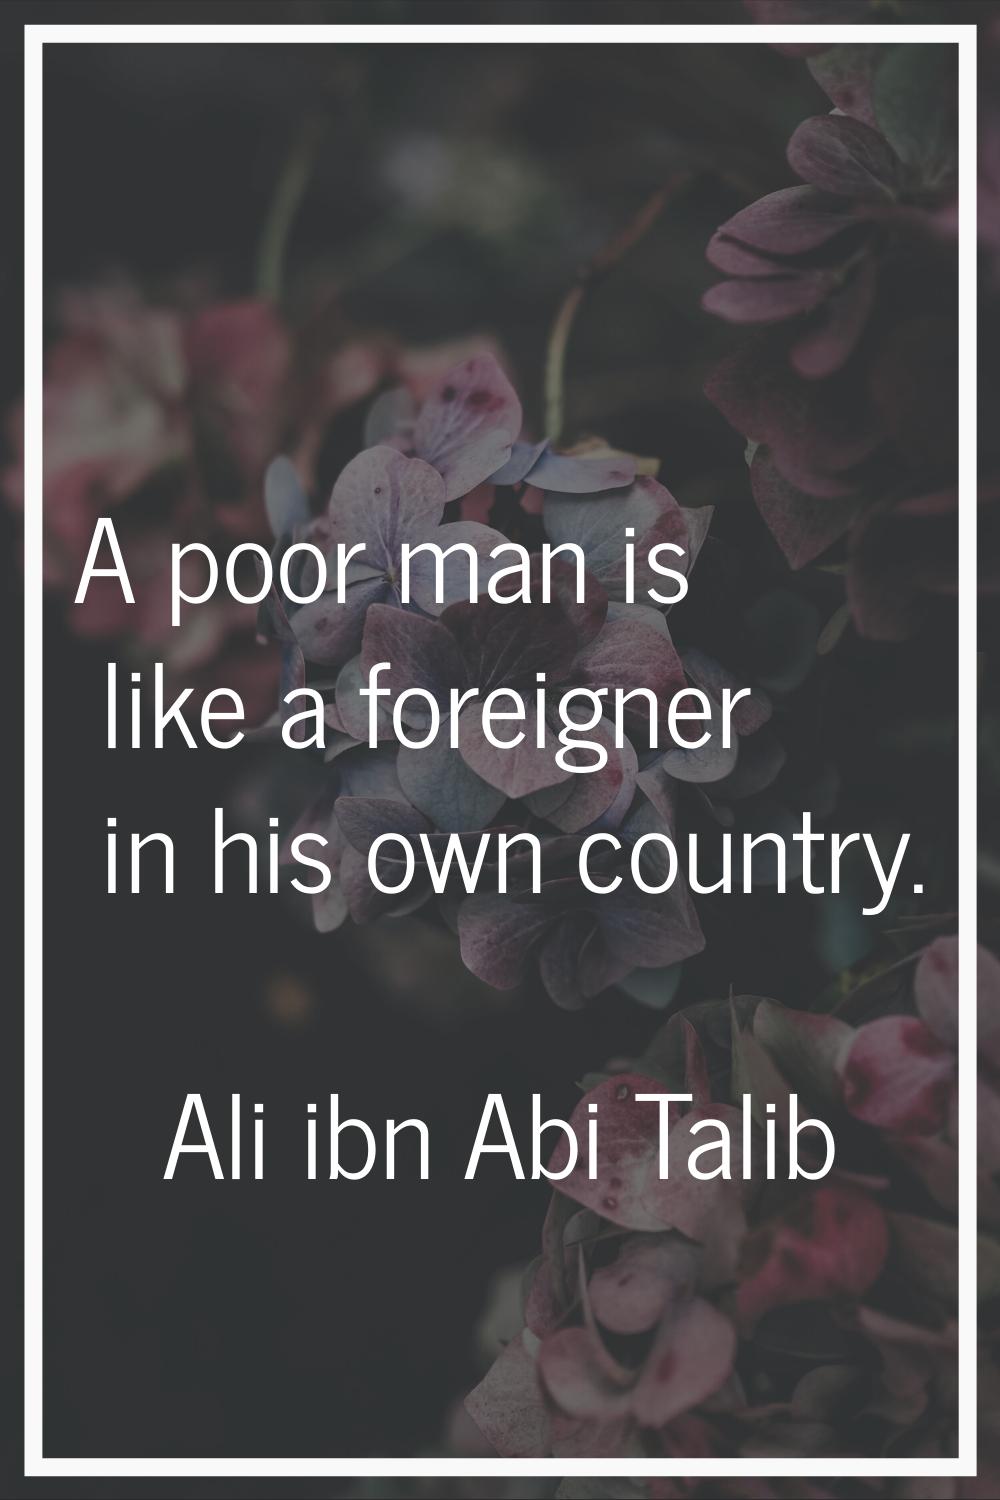 A poor man is like a foreigner in his own country.